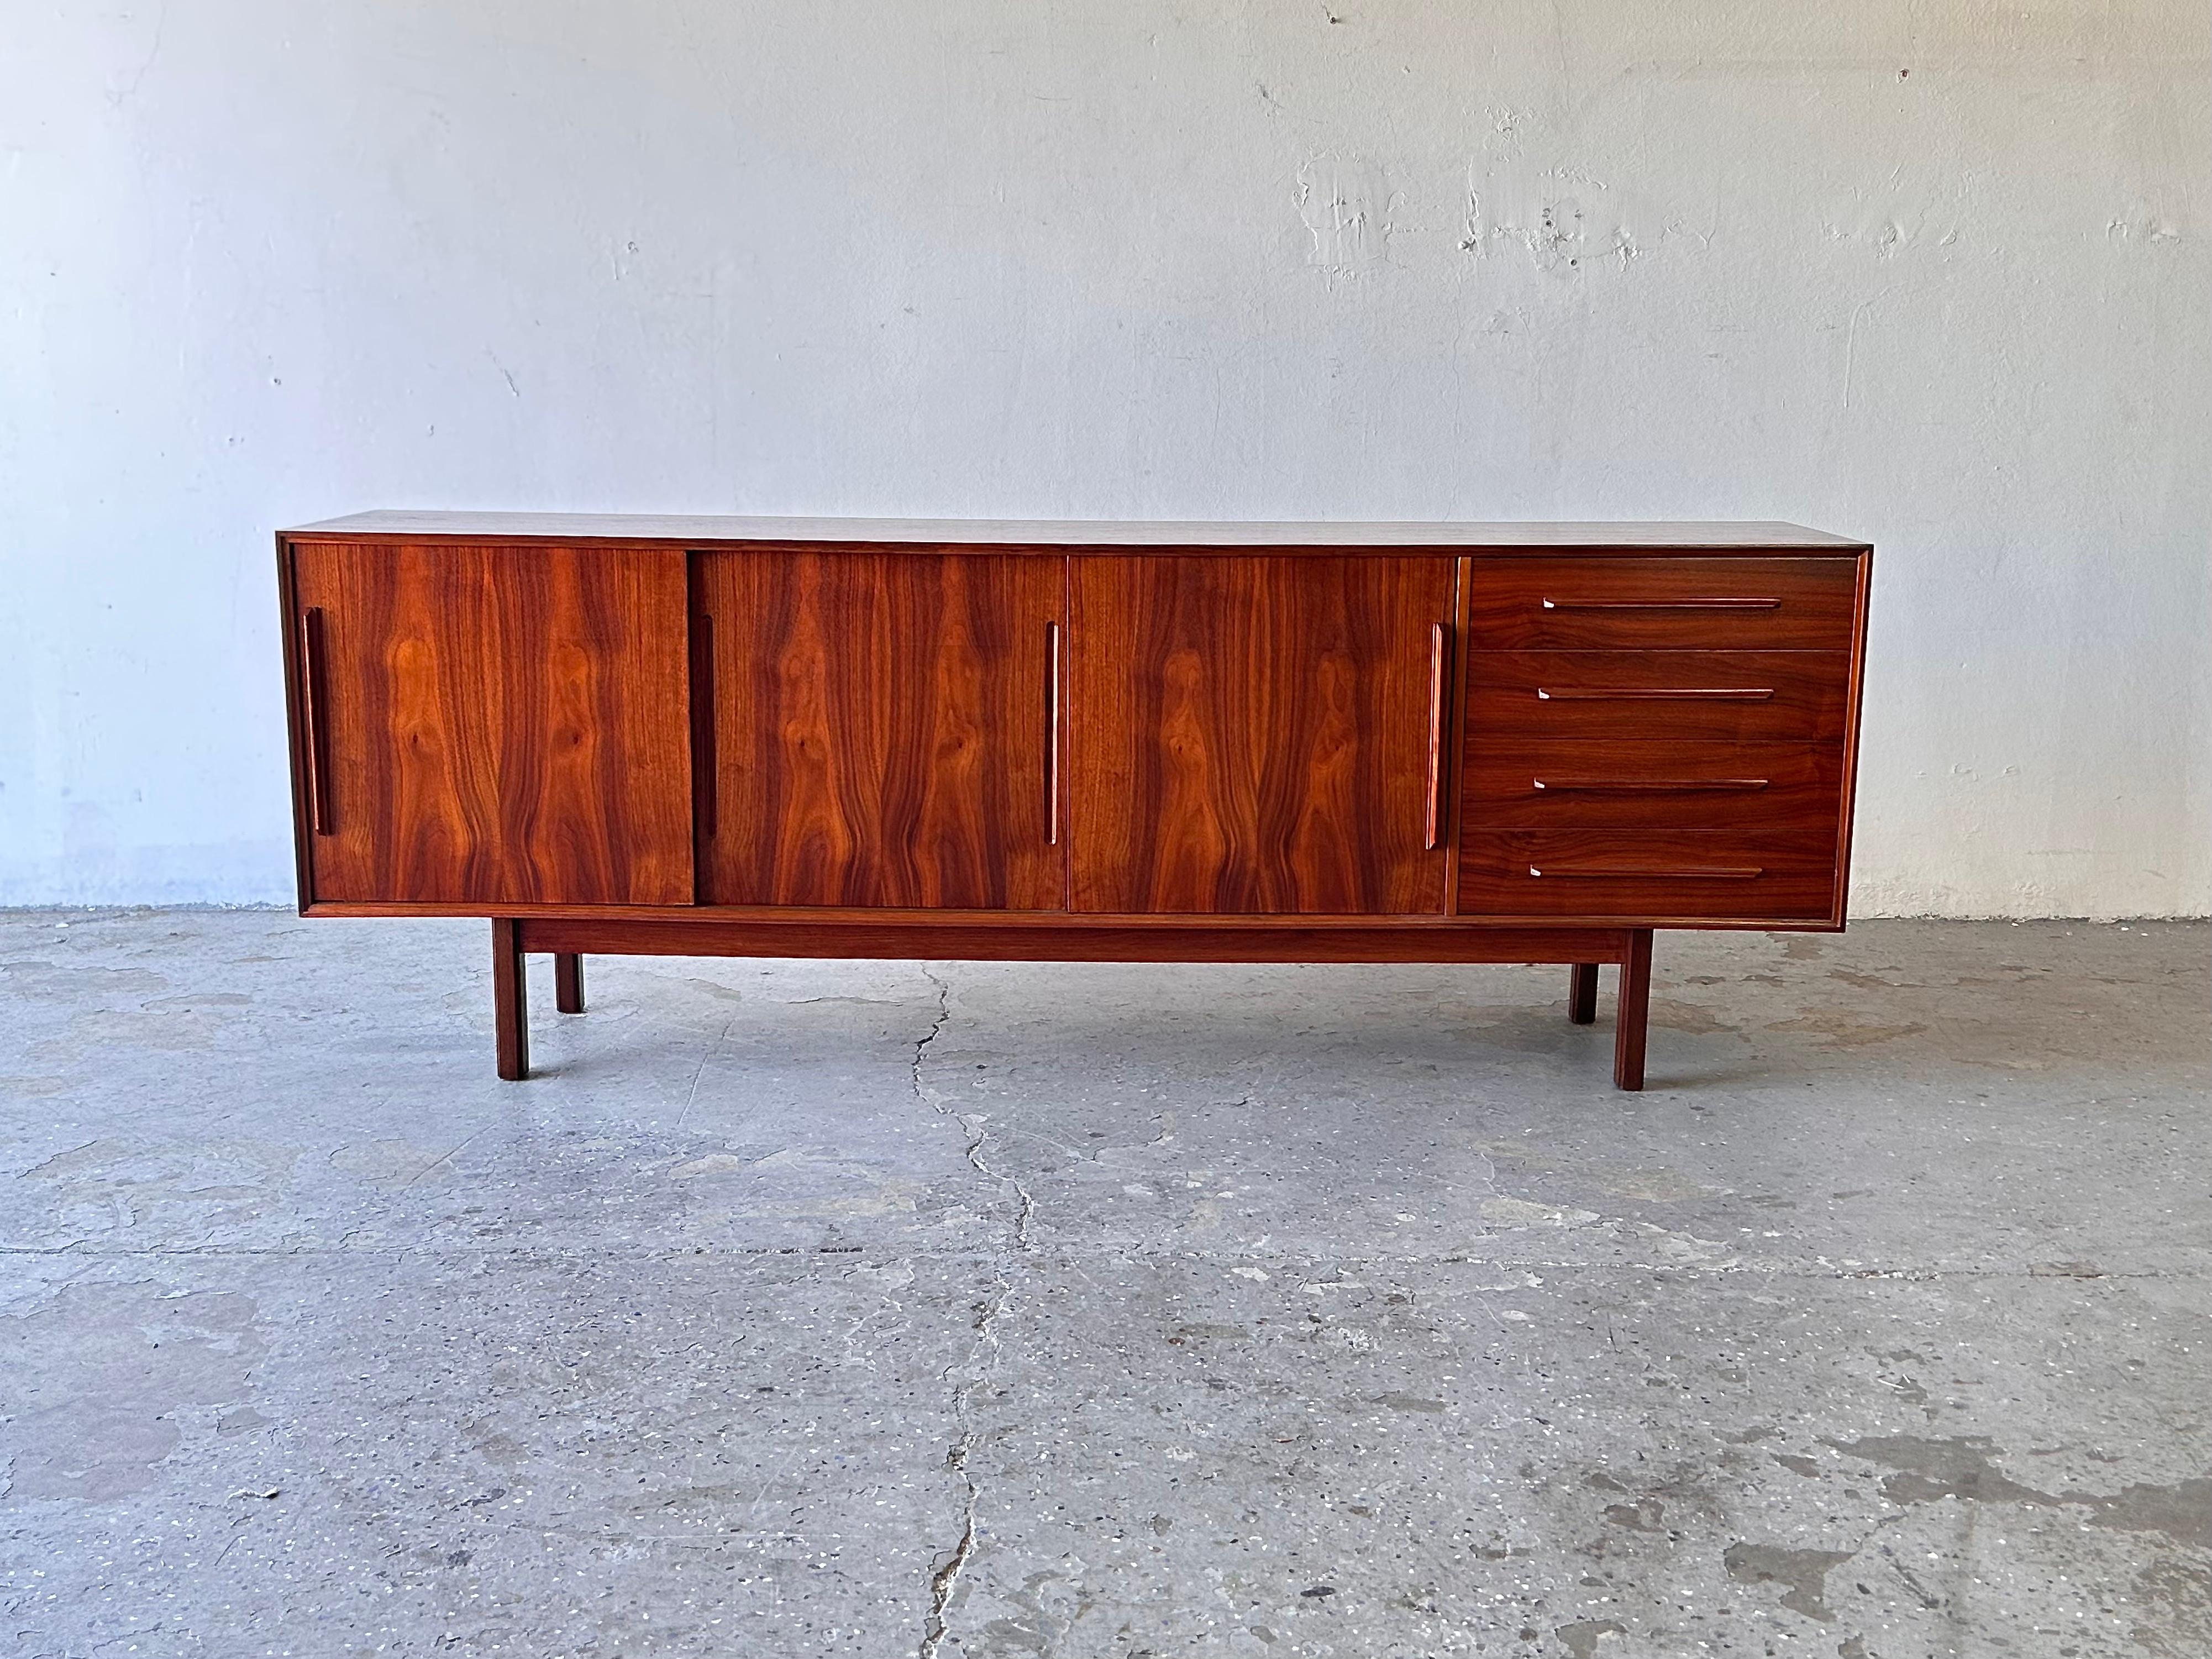 
Exceptional mid century Rosewood sliding door credenza or server by Ib-Kofod Larsen for Faarup Møbelfabrik made in Denmark, circa 1960’s. Beautifully rosewood  grained, extra long credenza. Features three sliding cabinet doors and four dovetailed